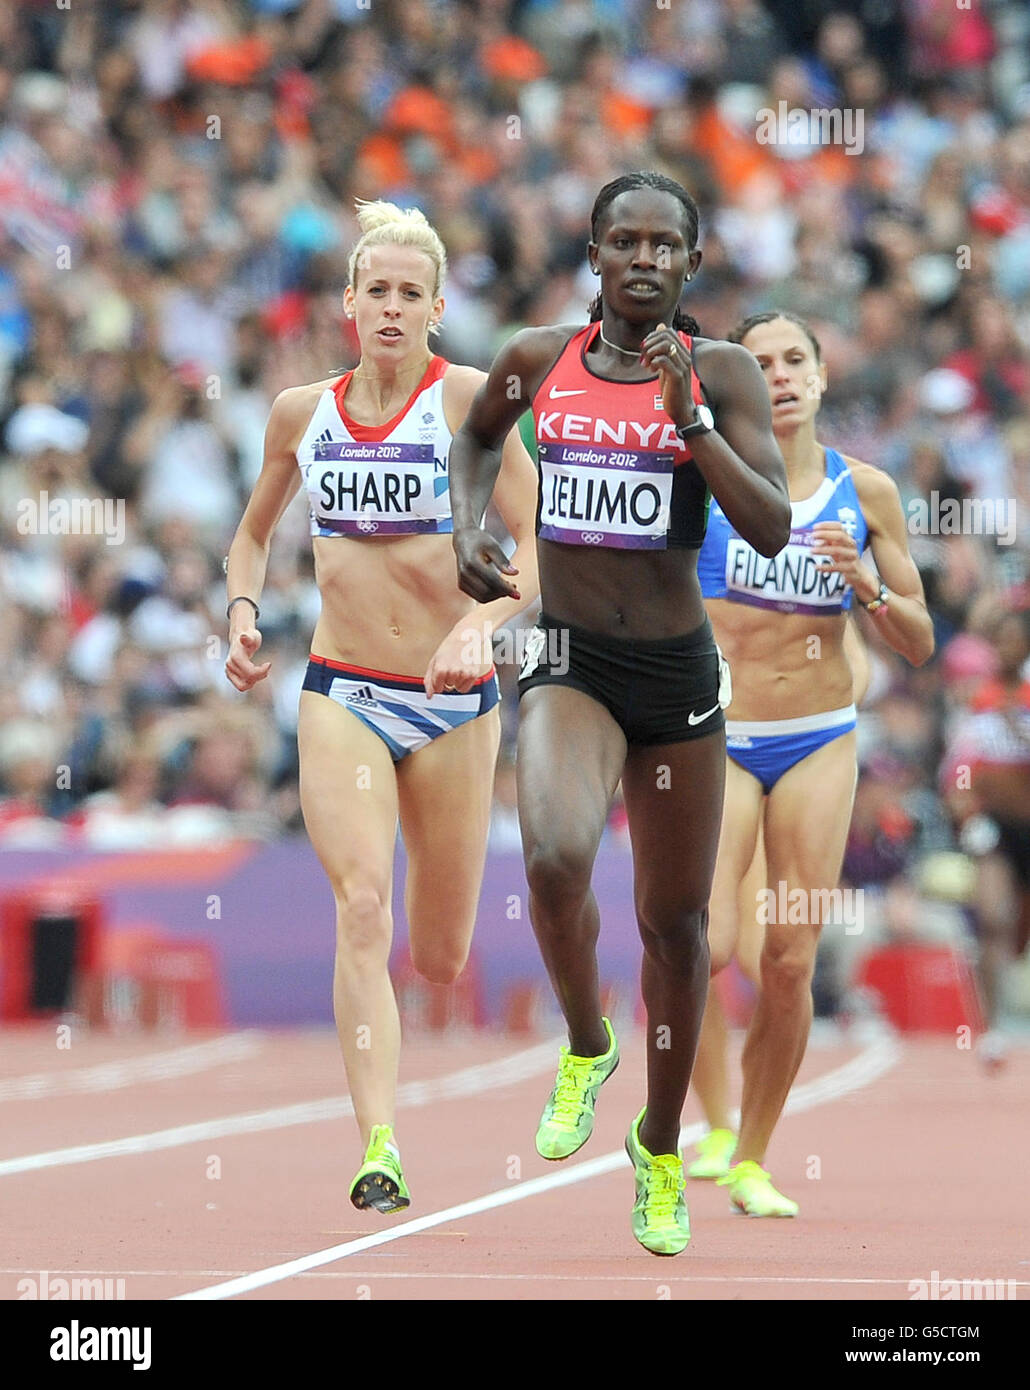 Great Britain's Lynsey Sharp (left) on her way to finishing second in her heat of the Women's 800m behind Kenya's Pamela Jelimo at the Olympic Stadium, London. Stock Photo